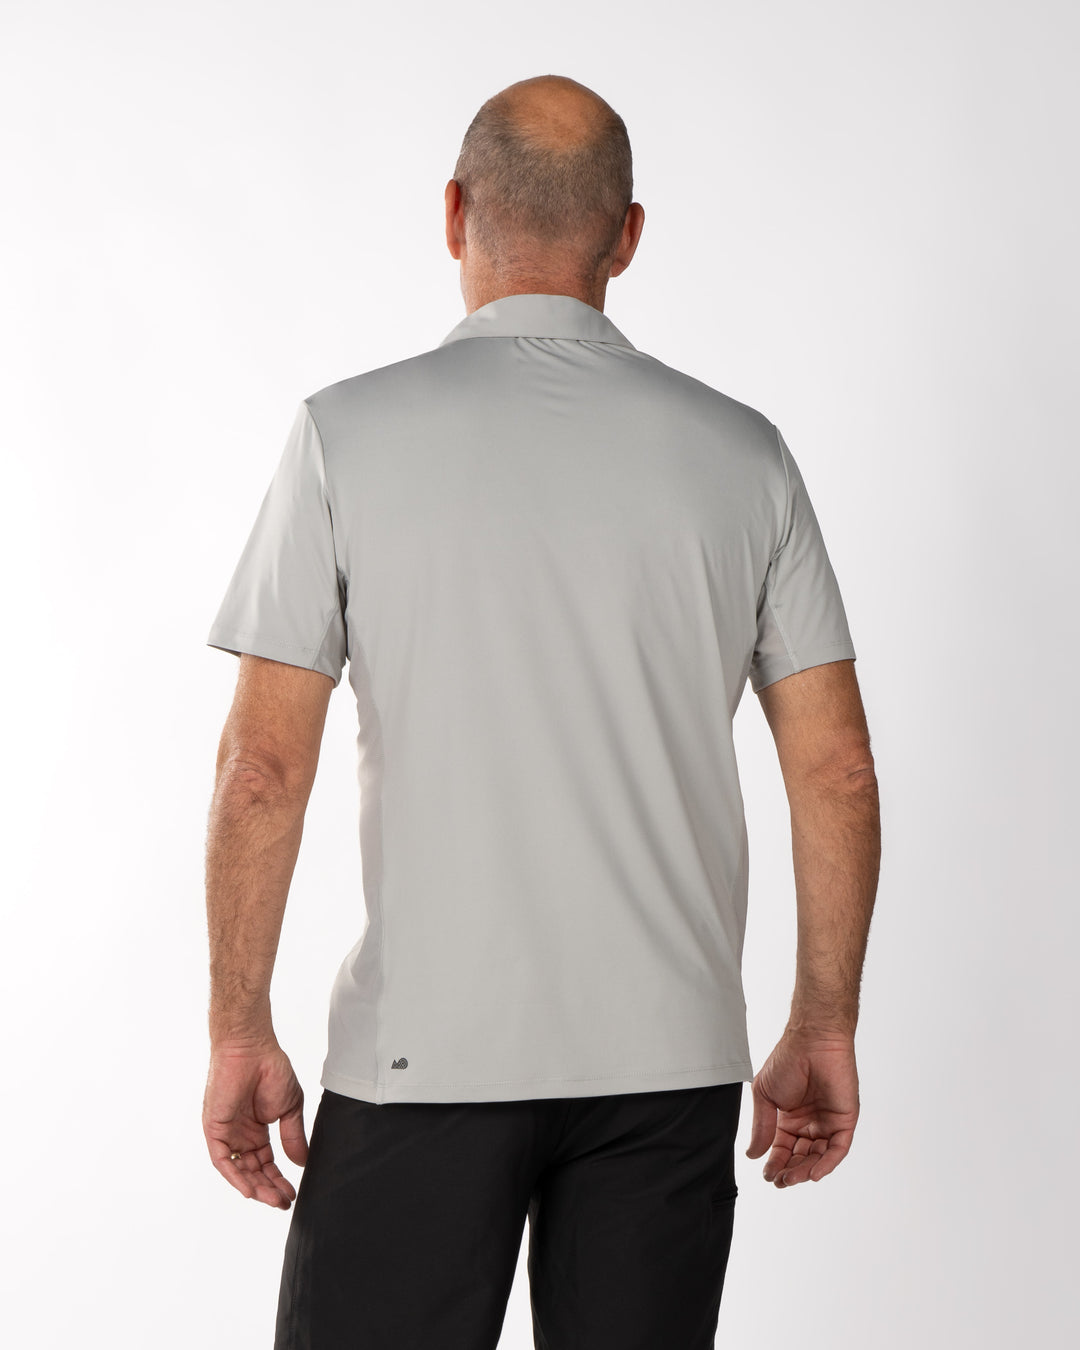 DS Mesh-Sided Polo - The MO Polo